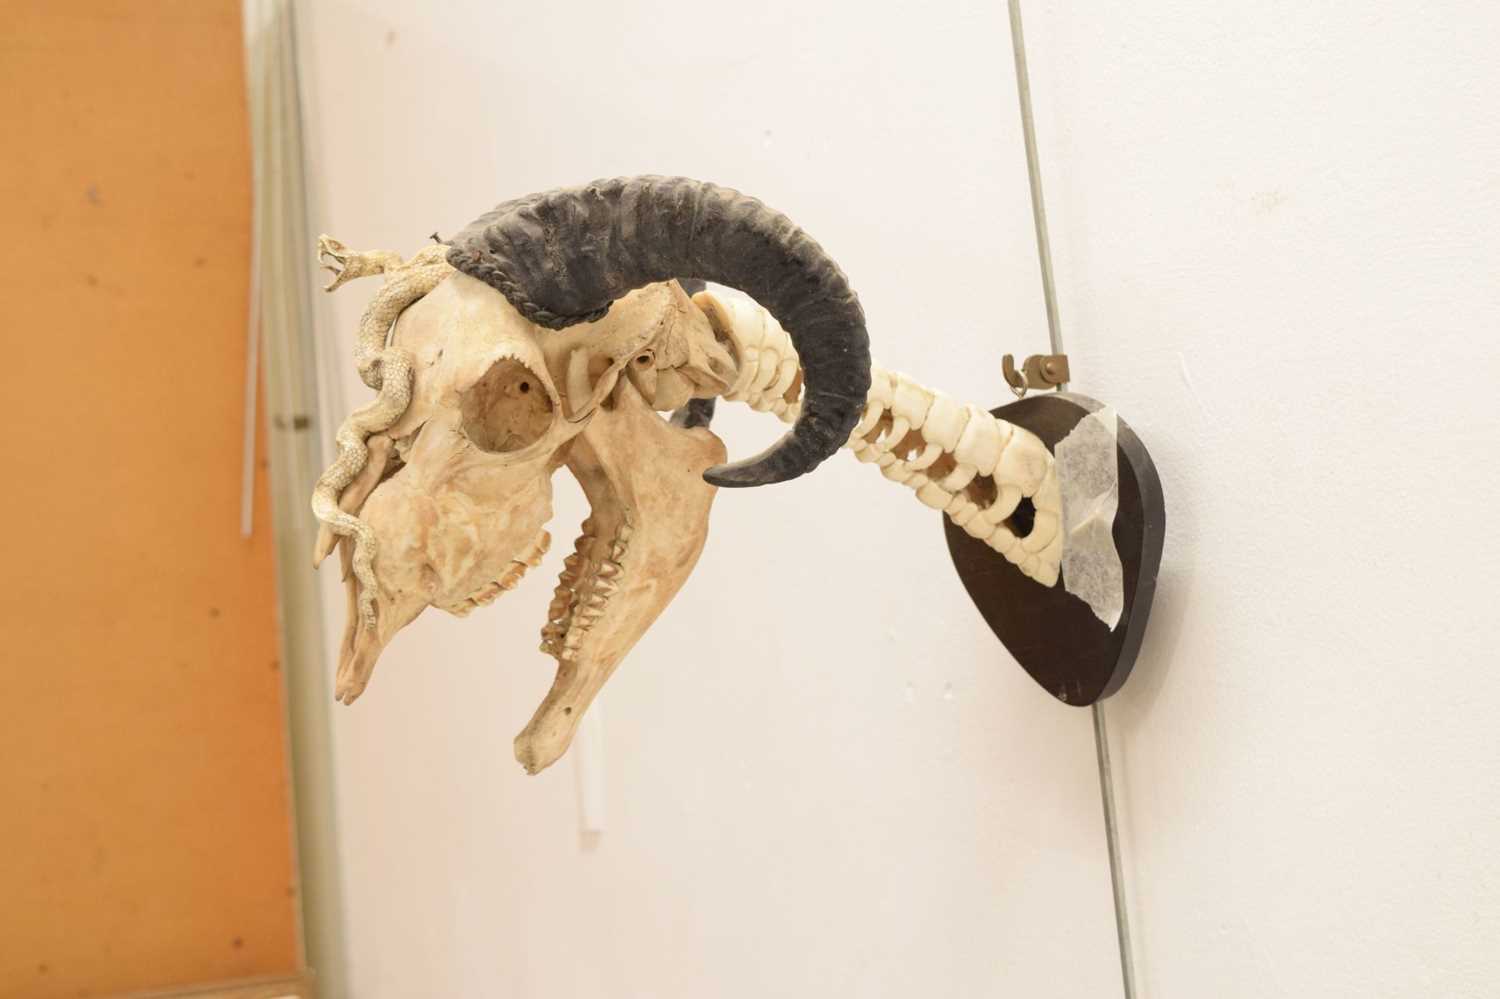 Mounted ram's head skull with snake - Image 6 of 11